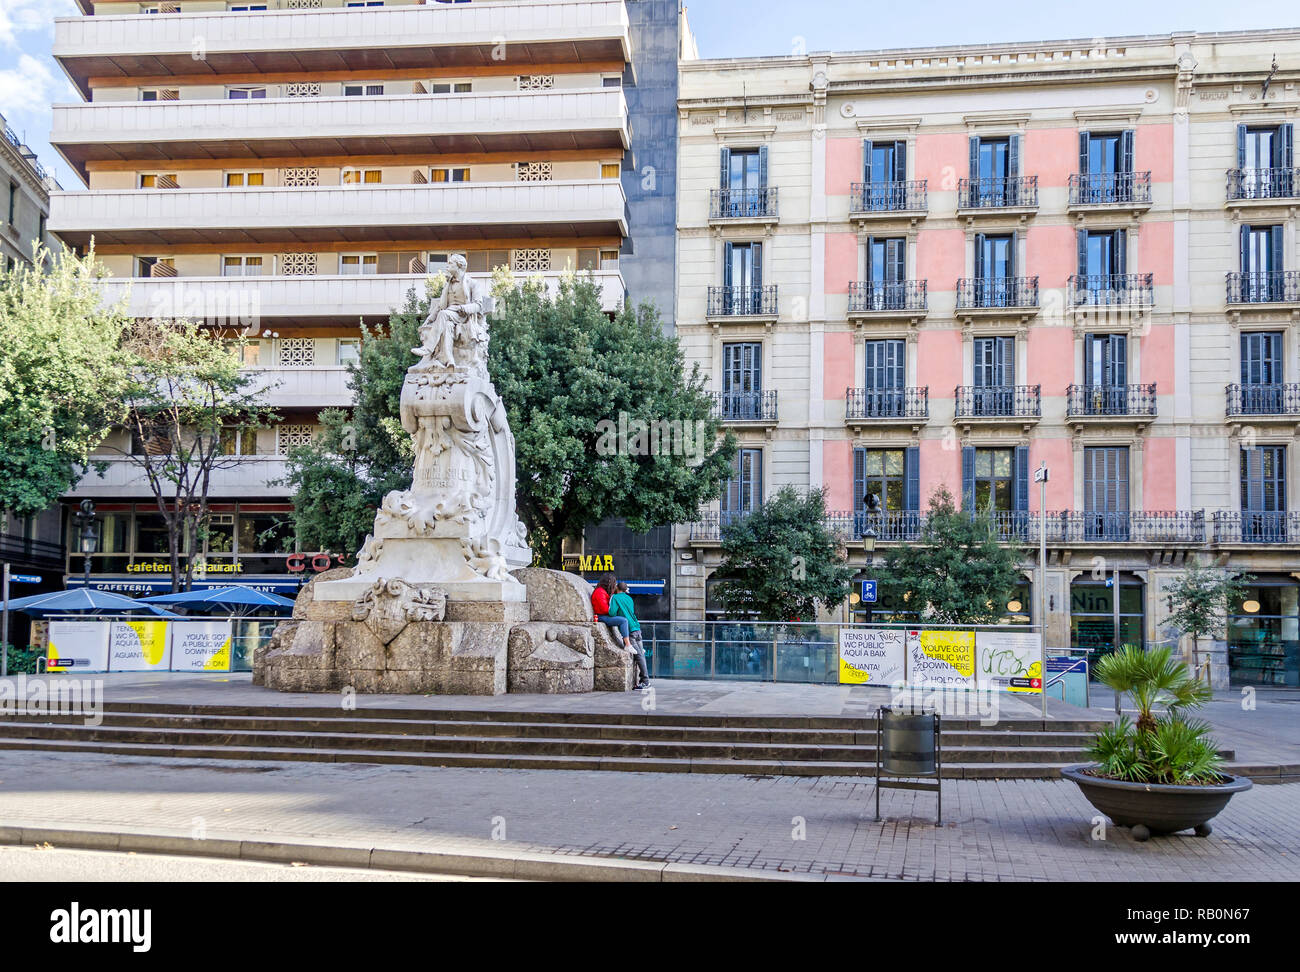 Barcelona, Spain - November 10, 2018:  Theater Square on the Rambla and the monument to the founder of the Catalan theater Frederic Soler  and an enam Stock Photo